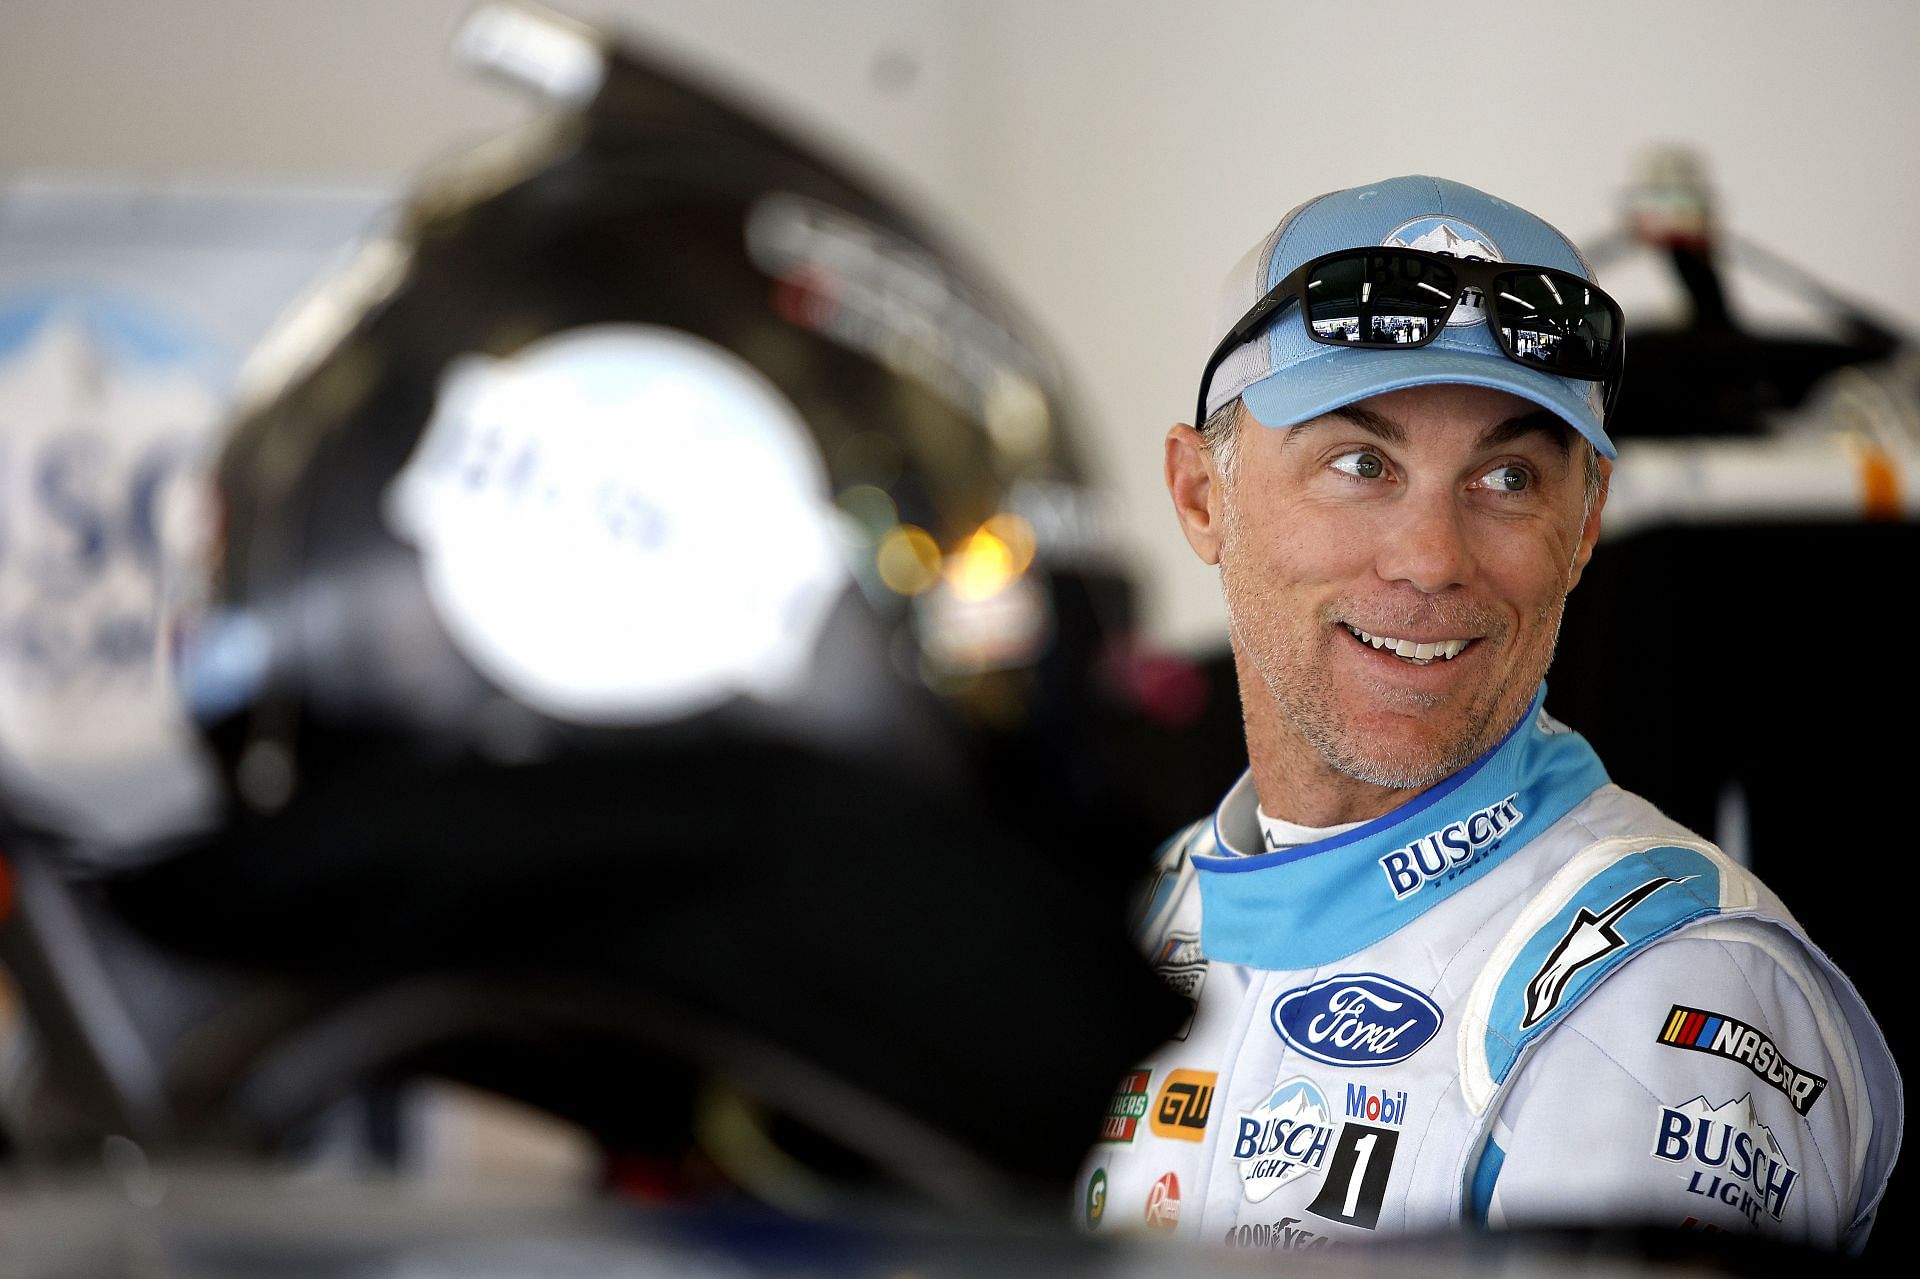 Kevin Harvick waits in the garage area during practice for NASCAR Cup Series 64th Annual Daytona 500 at Daytona International Speedway.